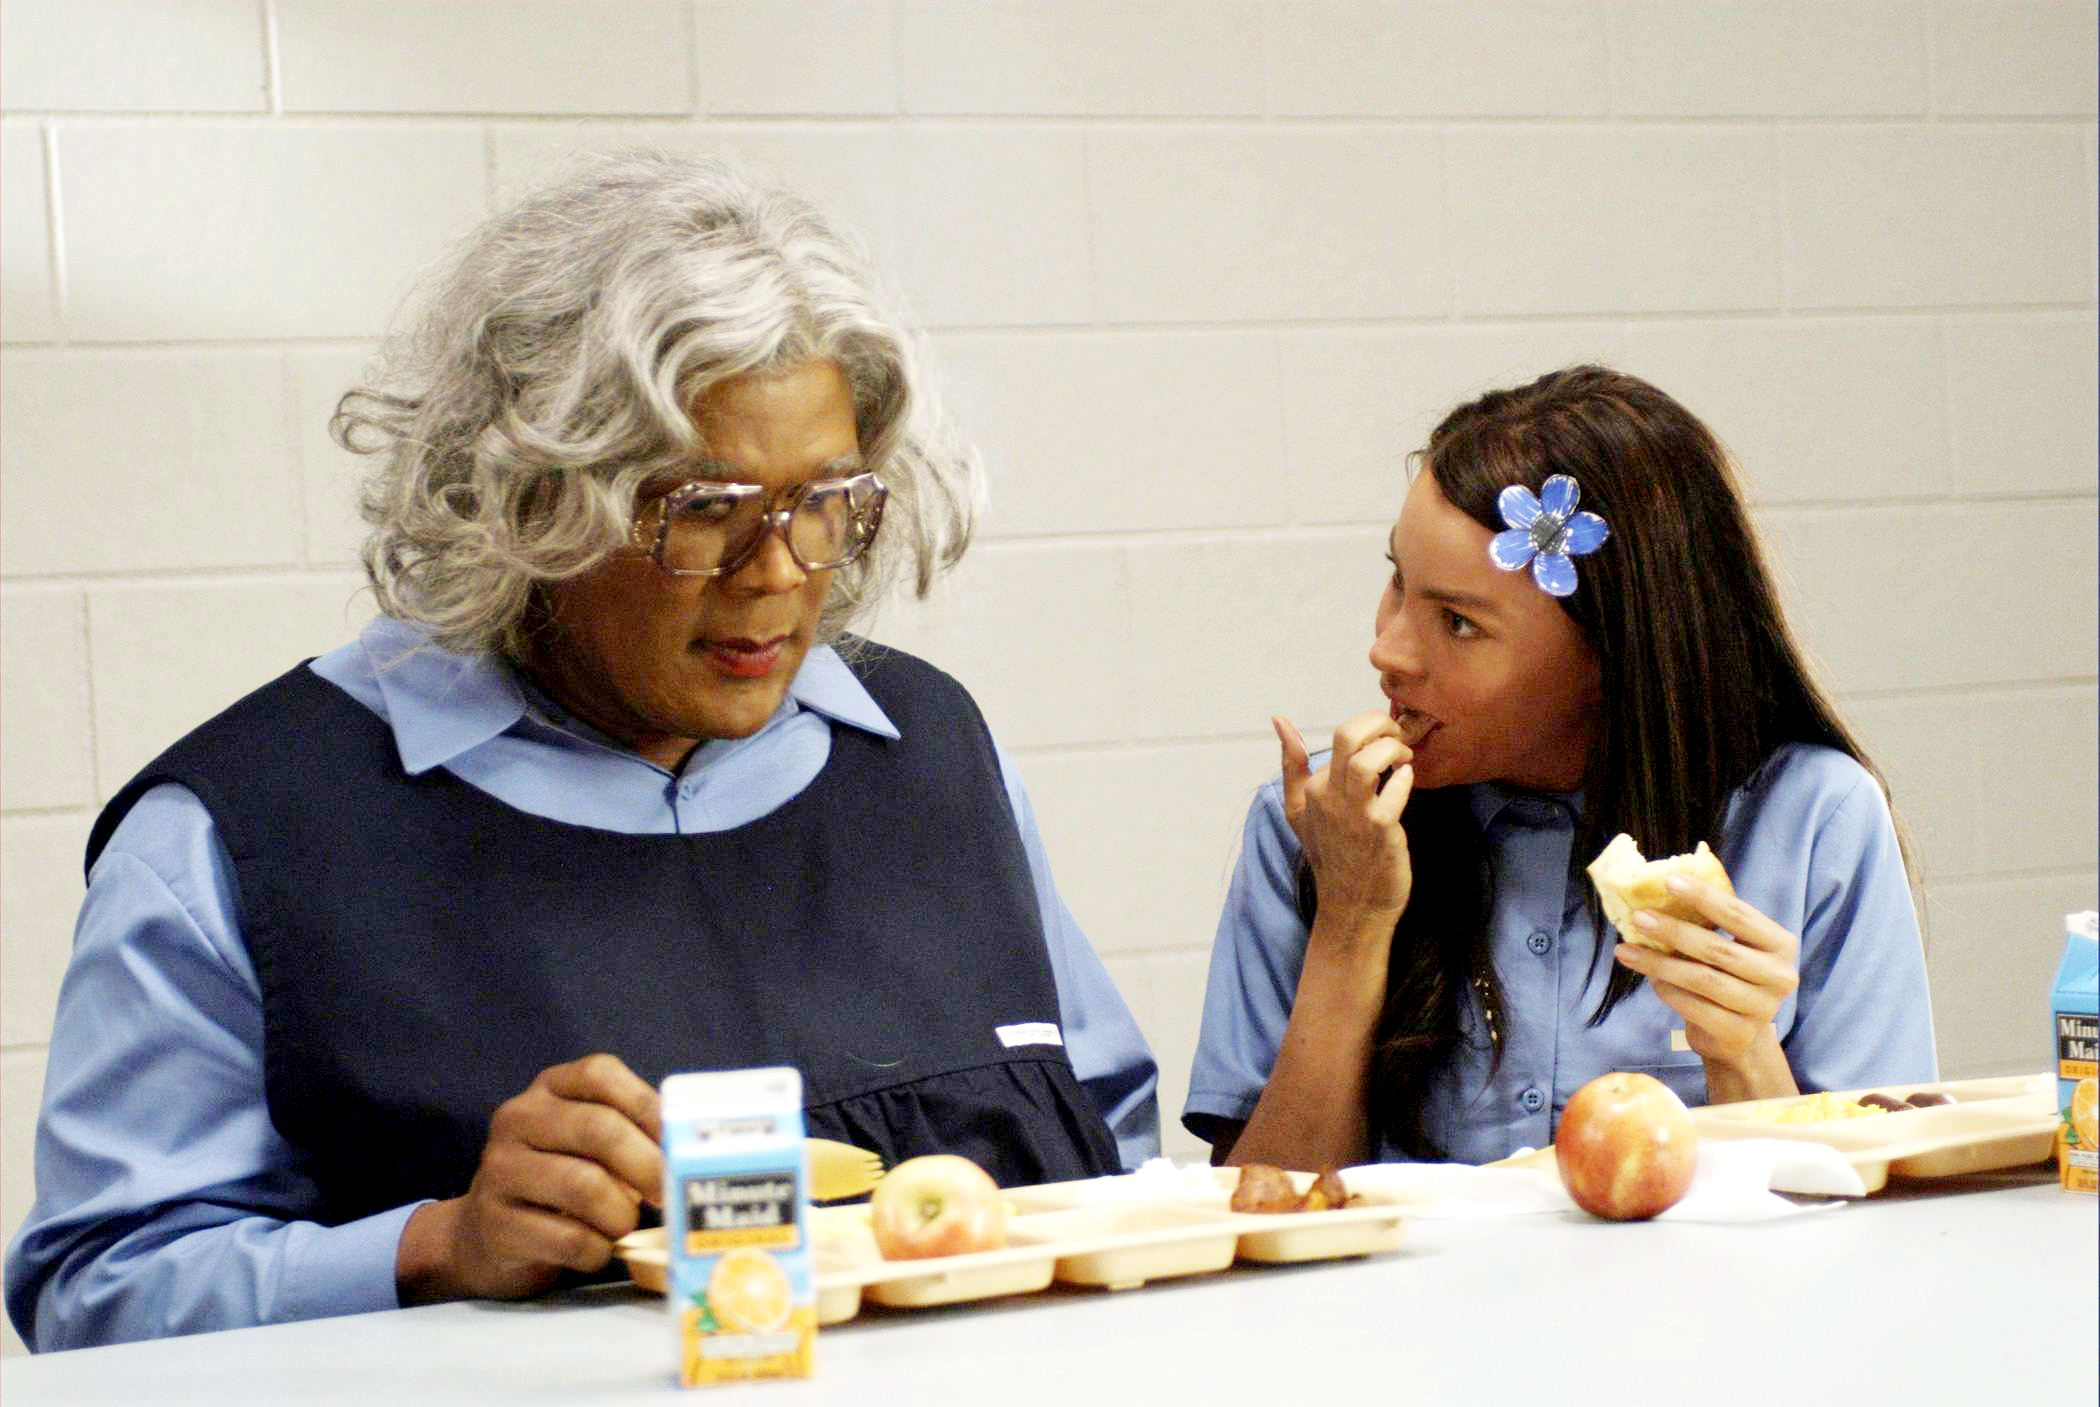 Madea+goes+to+jail+play+songs